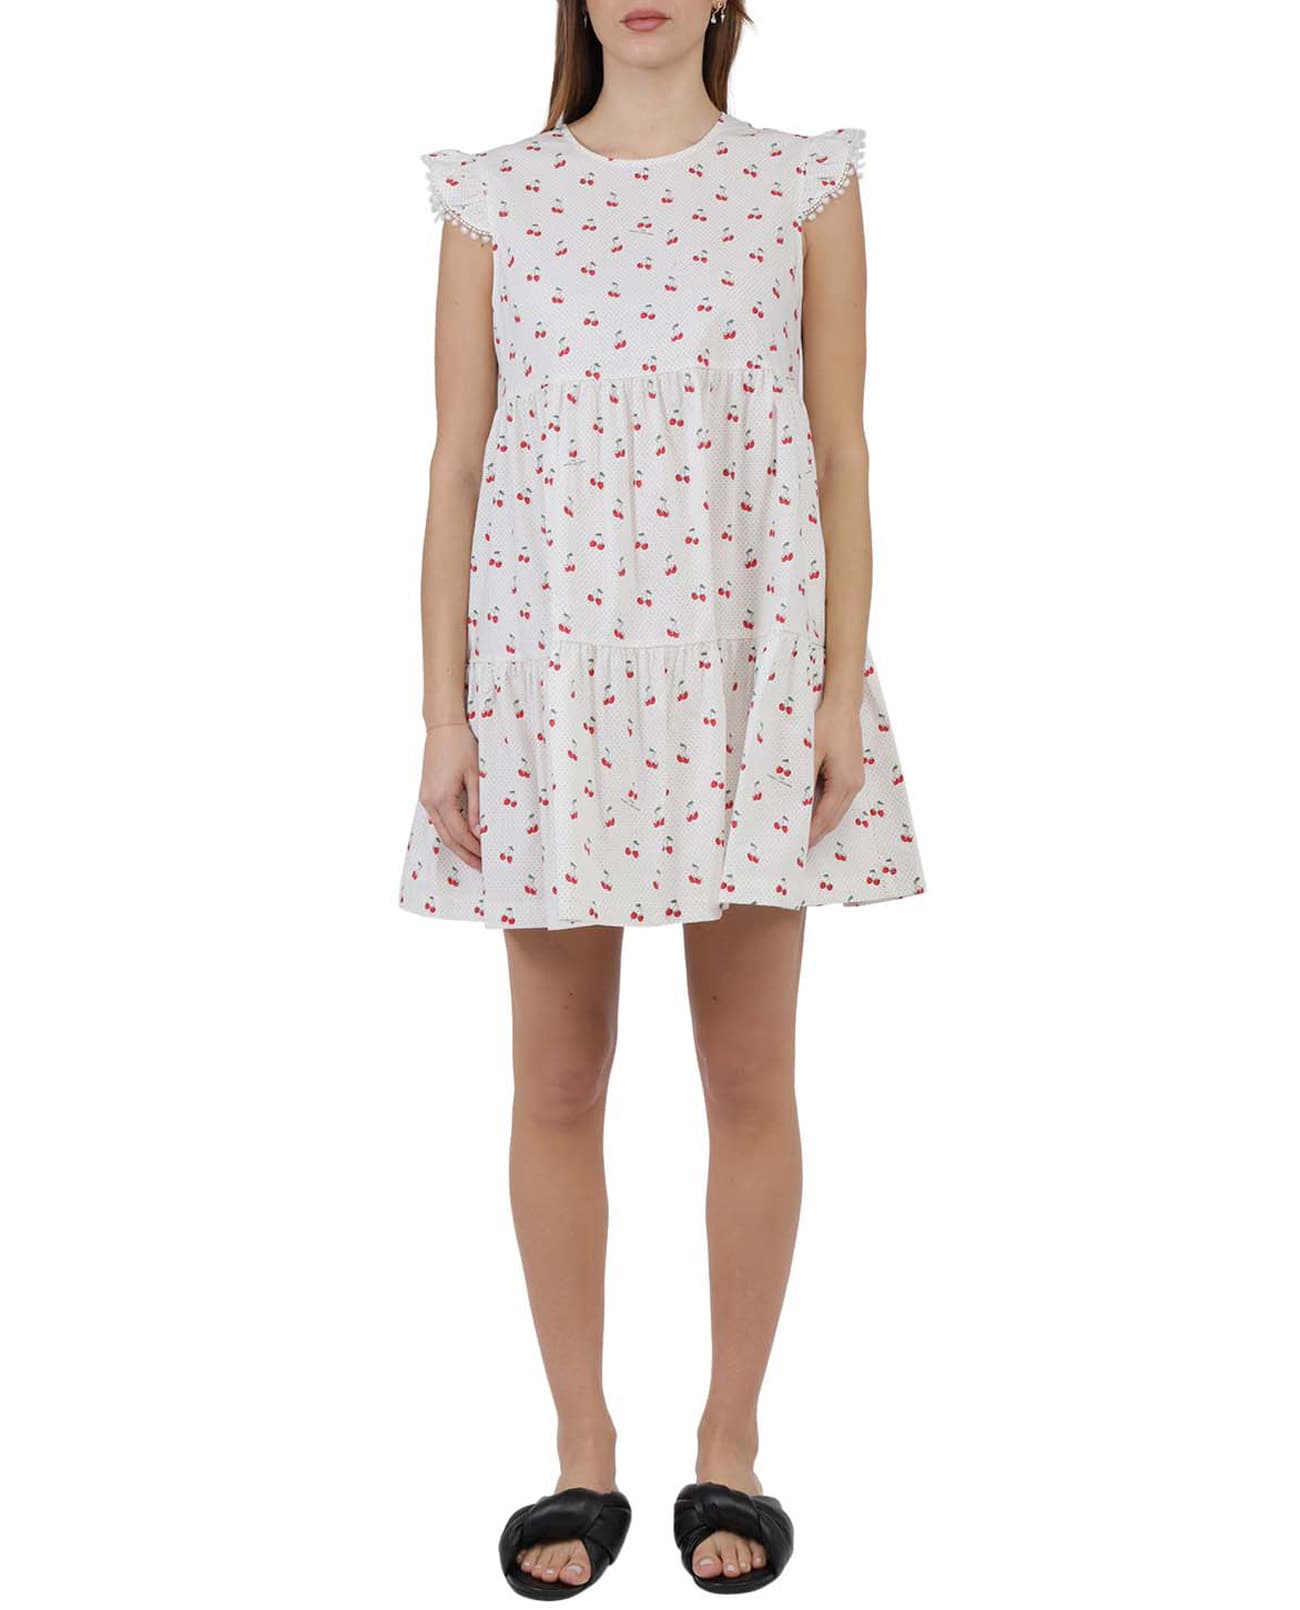 The Marc Jacobs Cherry Tent Dress